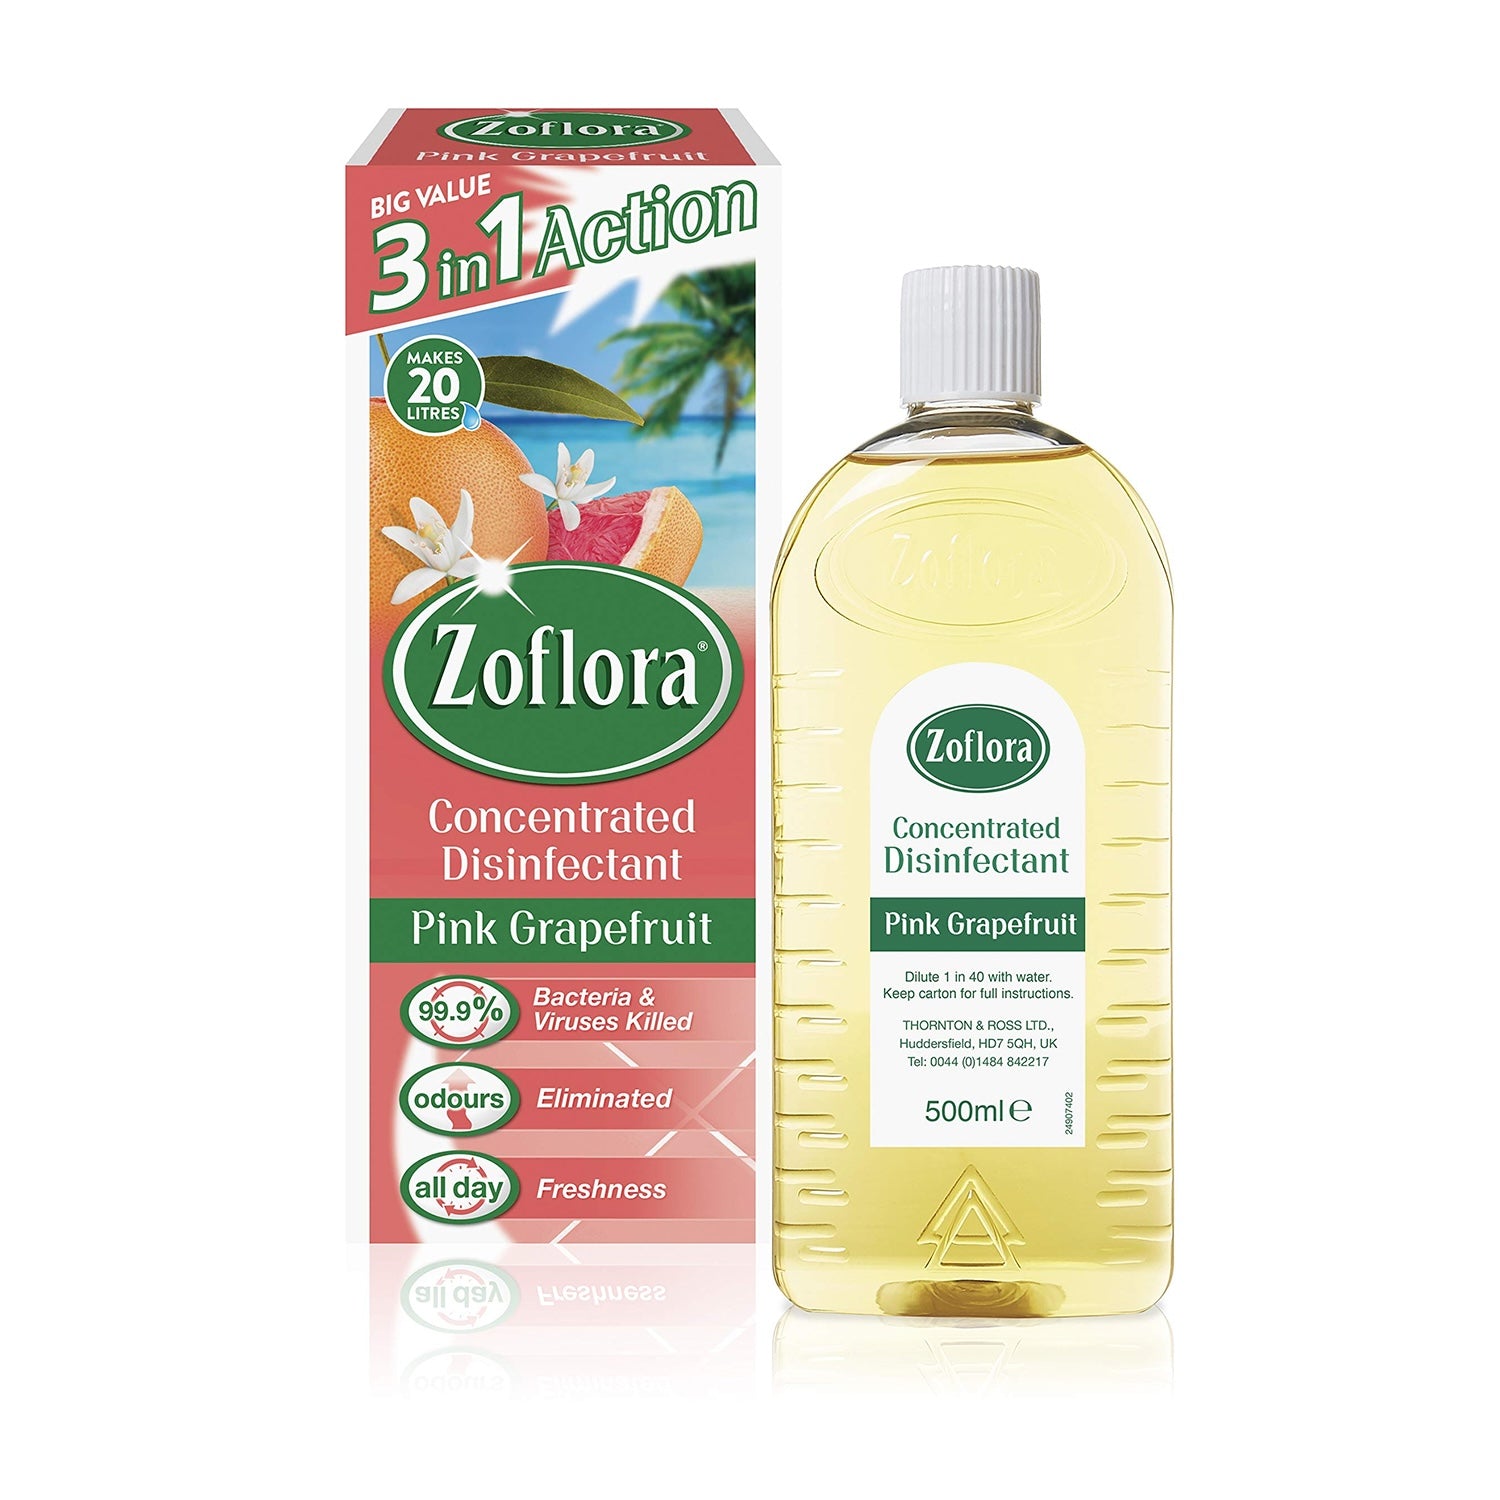 Zoflora Disinfectant | 500ml | Assorted Scents (3)